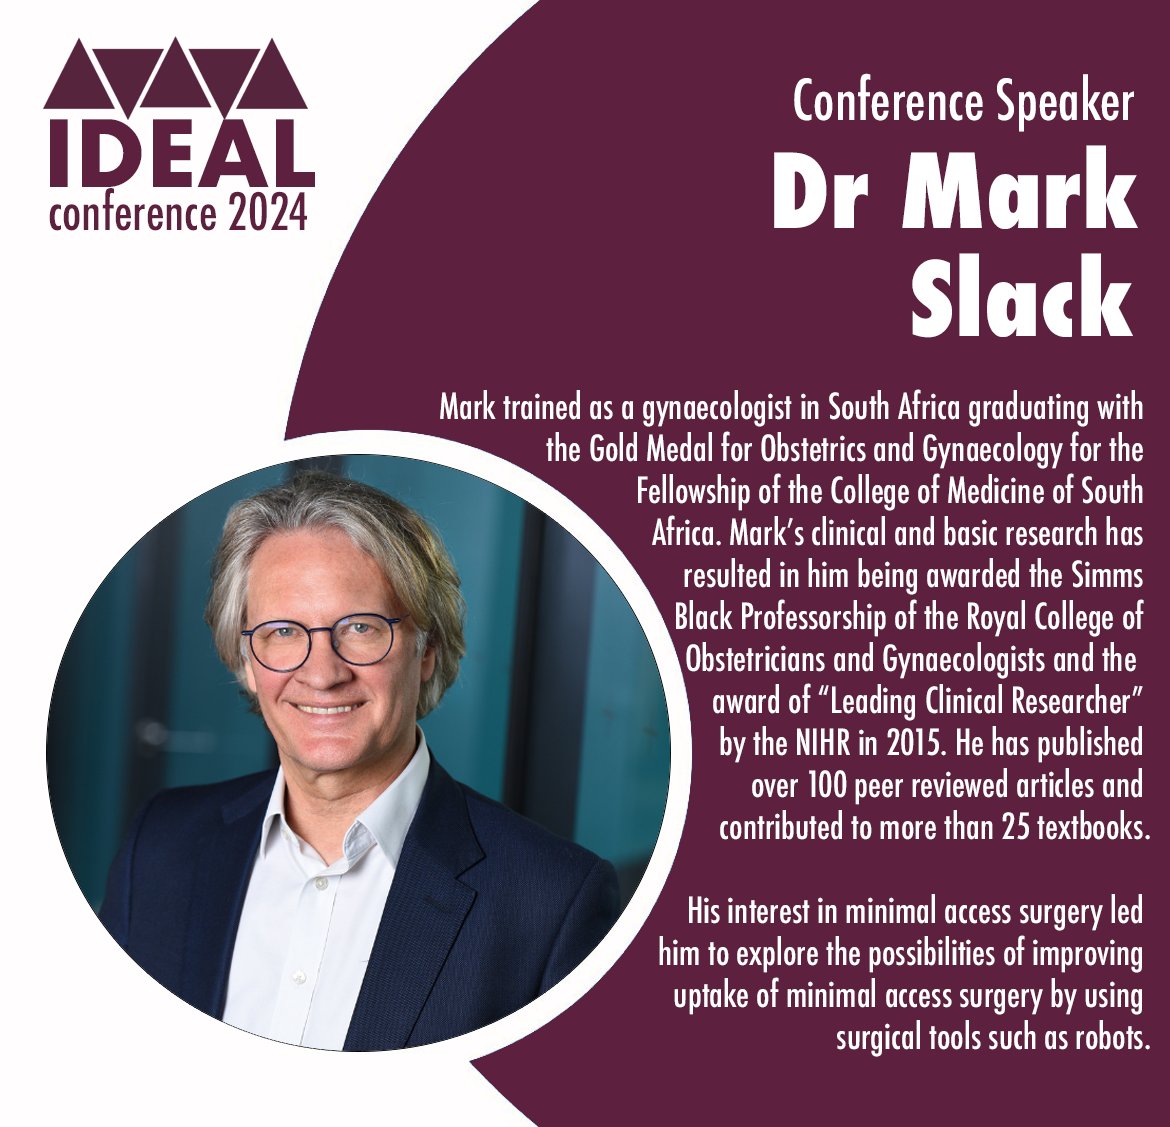 With only two days to go, hear from Dr Mark Slack of @CMRSurgical sharing their experience of Robotics in Practice. April 3rd - 4th, Royal Society of Medicine. Few tickets remaining: shorturl.at/lpDS9 #IDEAL2024 #Roboticsurgery #Innovation #Conference